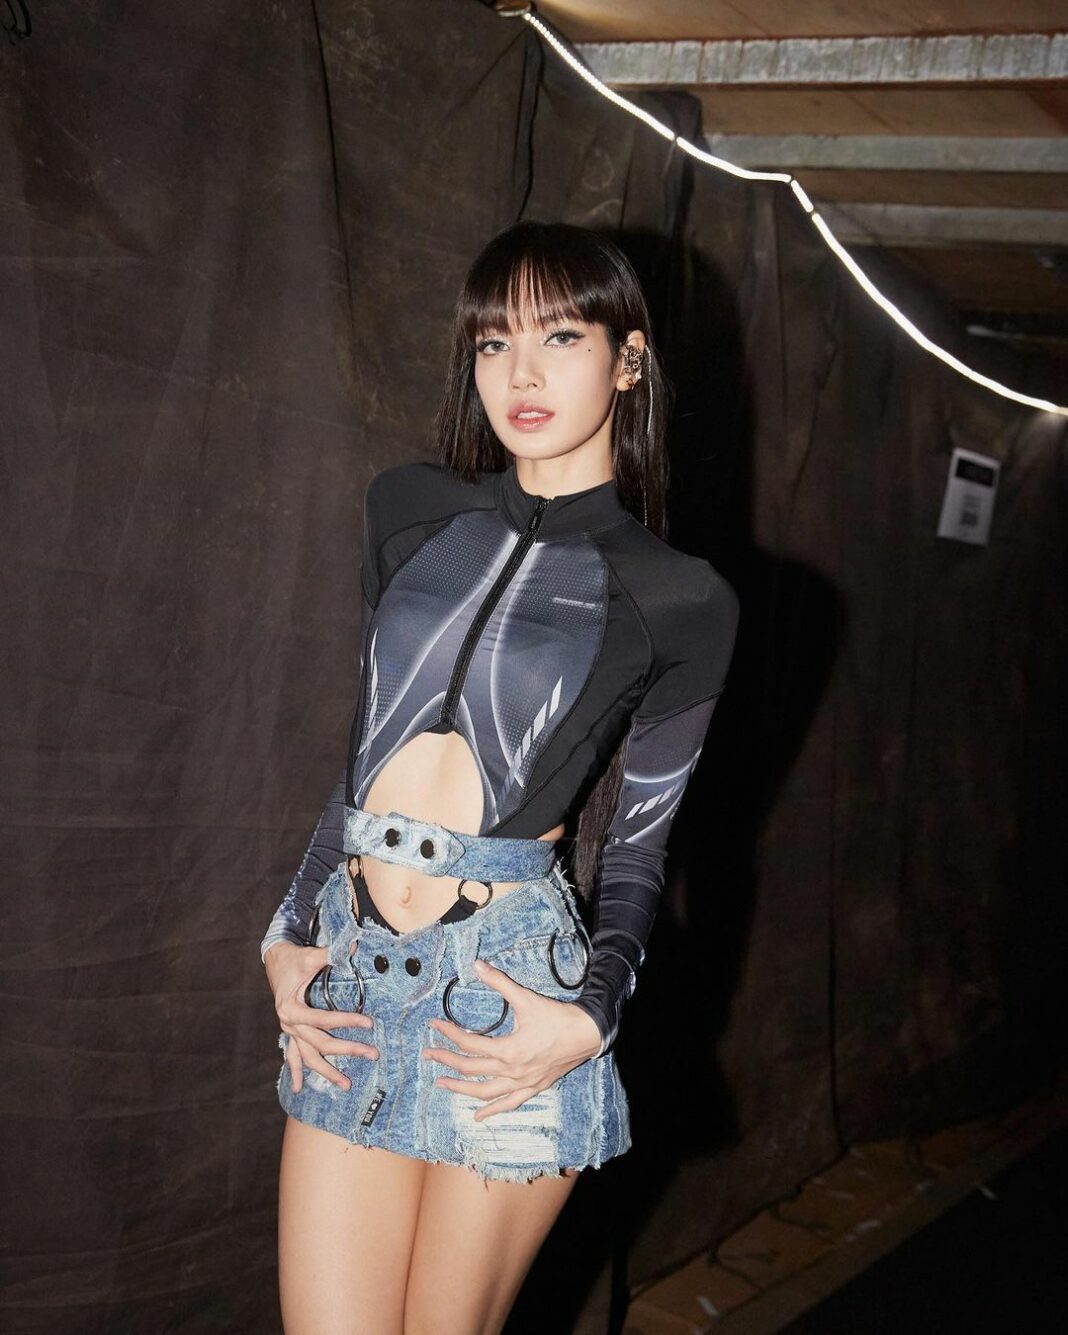 45 Cute & Hot Pics of Lisa Manoban from Blackpink - Know About Her ...